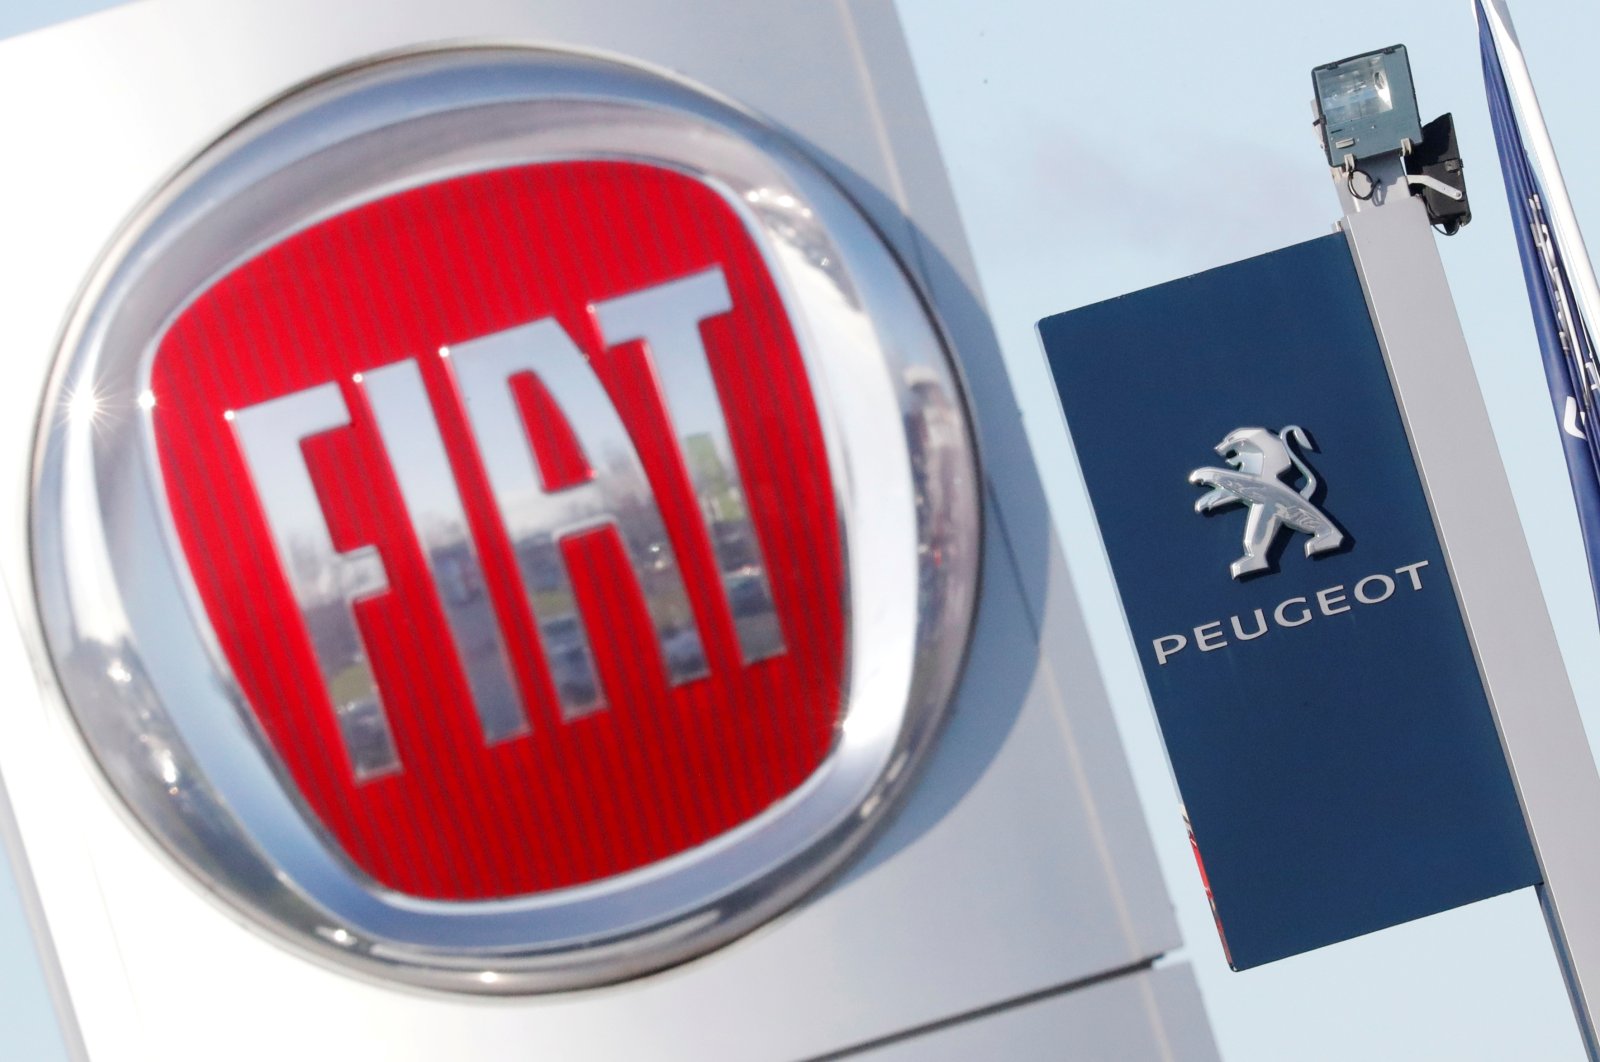 The logos of car manufacturers Fiat and Peugeot are seen in front of dealerships of the companies in Saint-Nazaire, France, Nov. 8, 2019. (Reuters Photo)